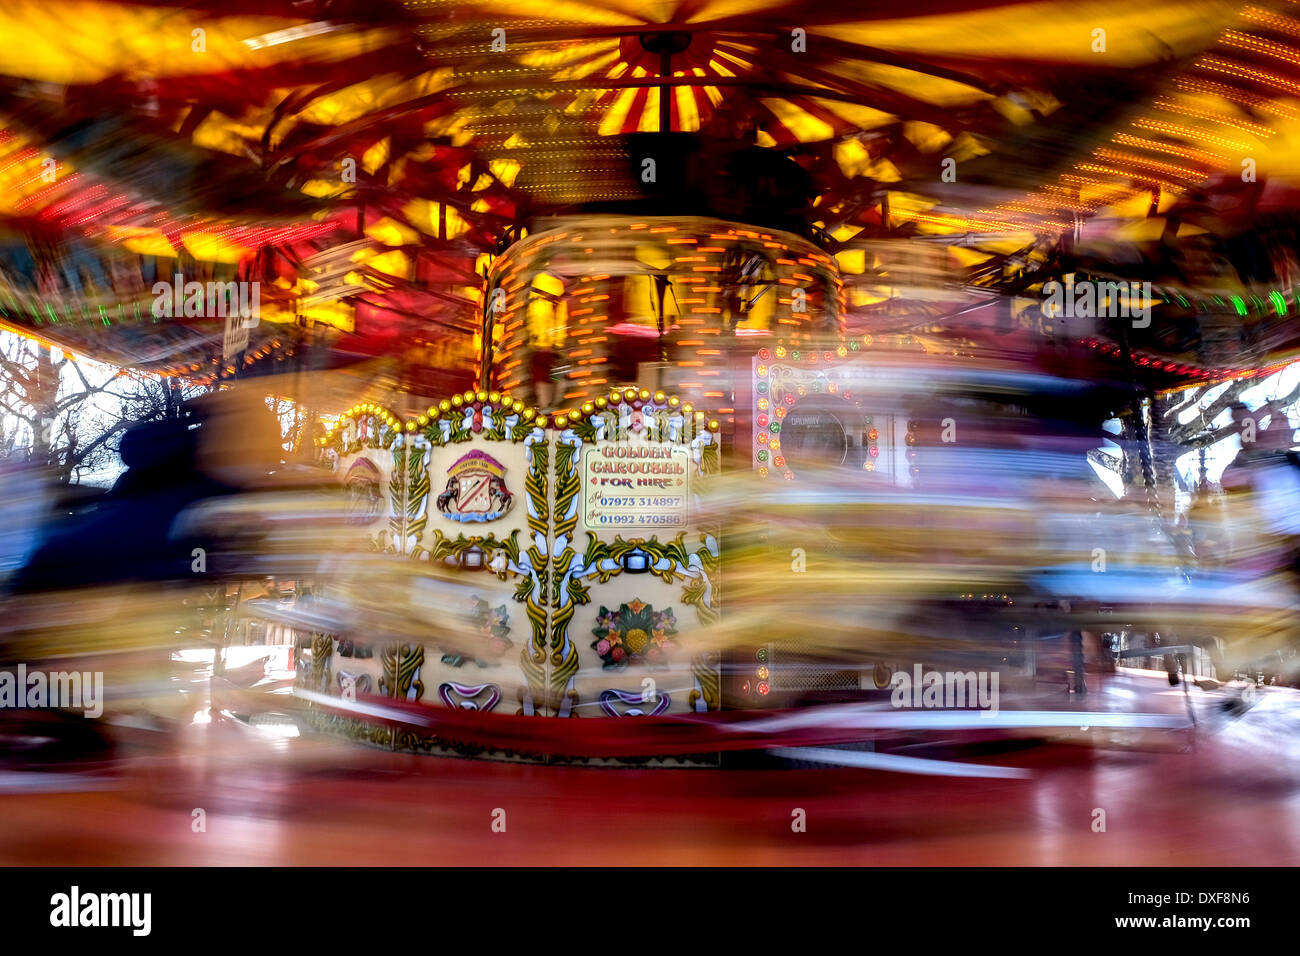 A carousel in motion. Stock Photo